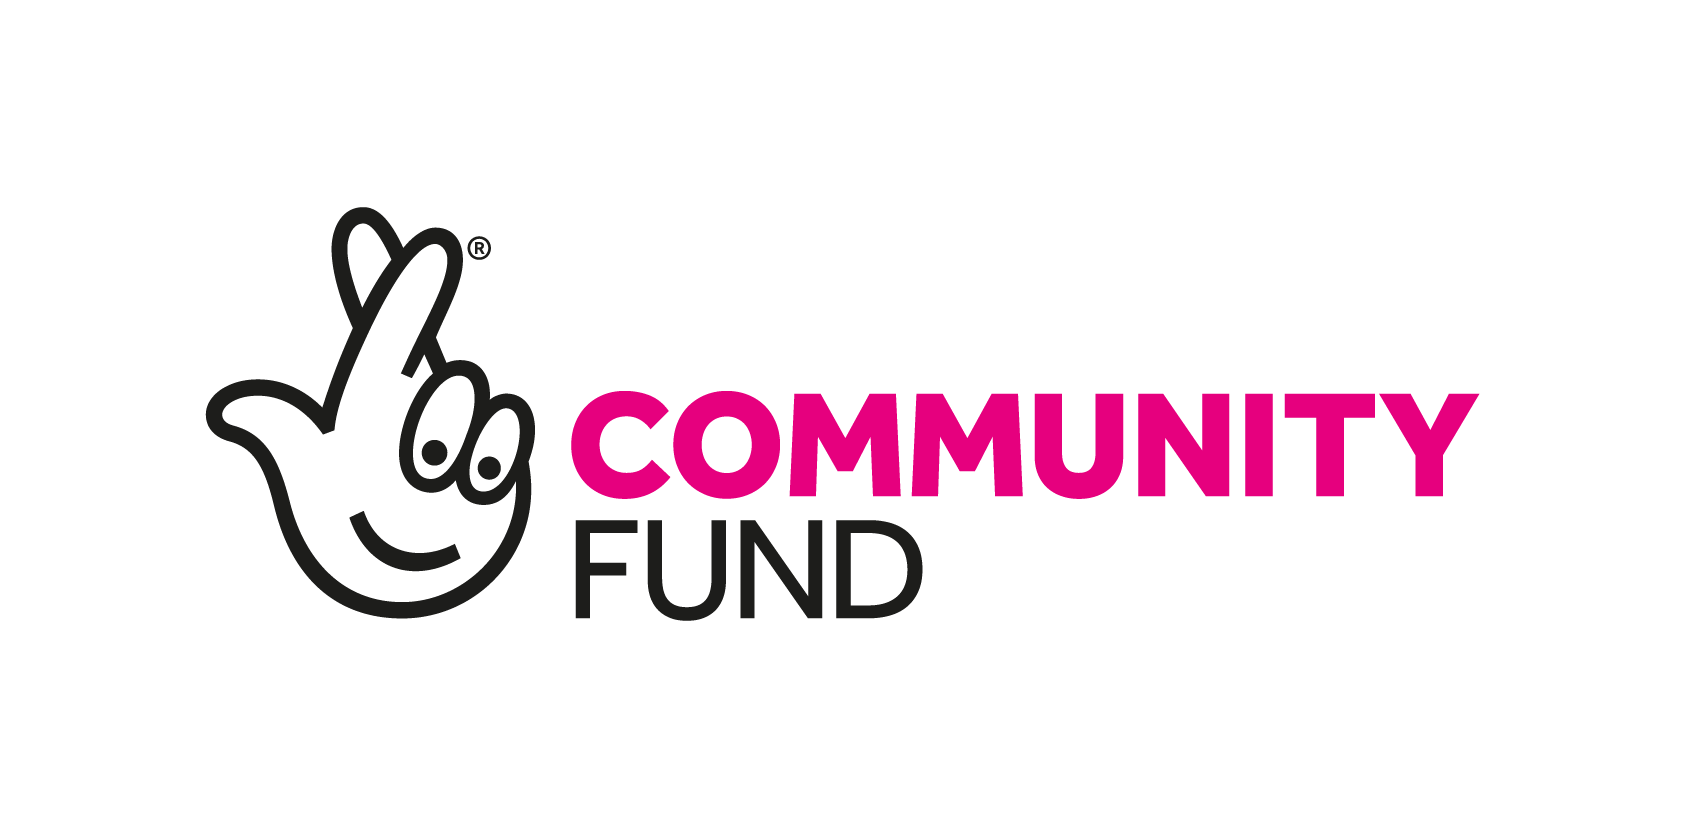 The National Lottery Community Fund logo